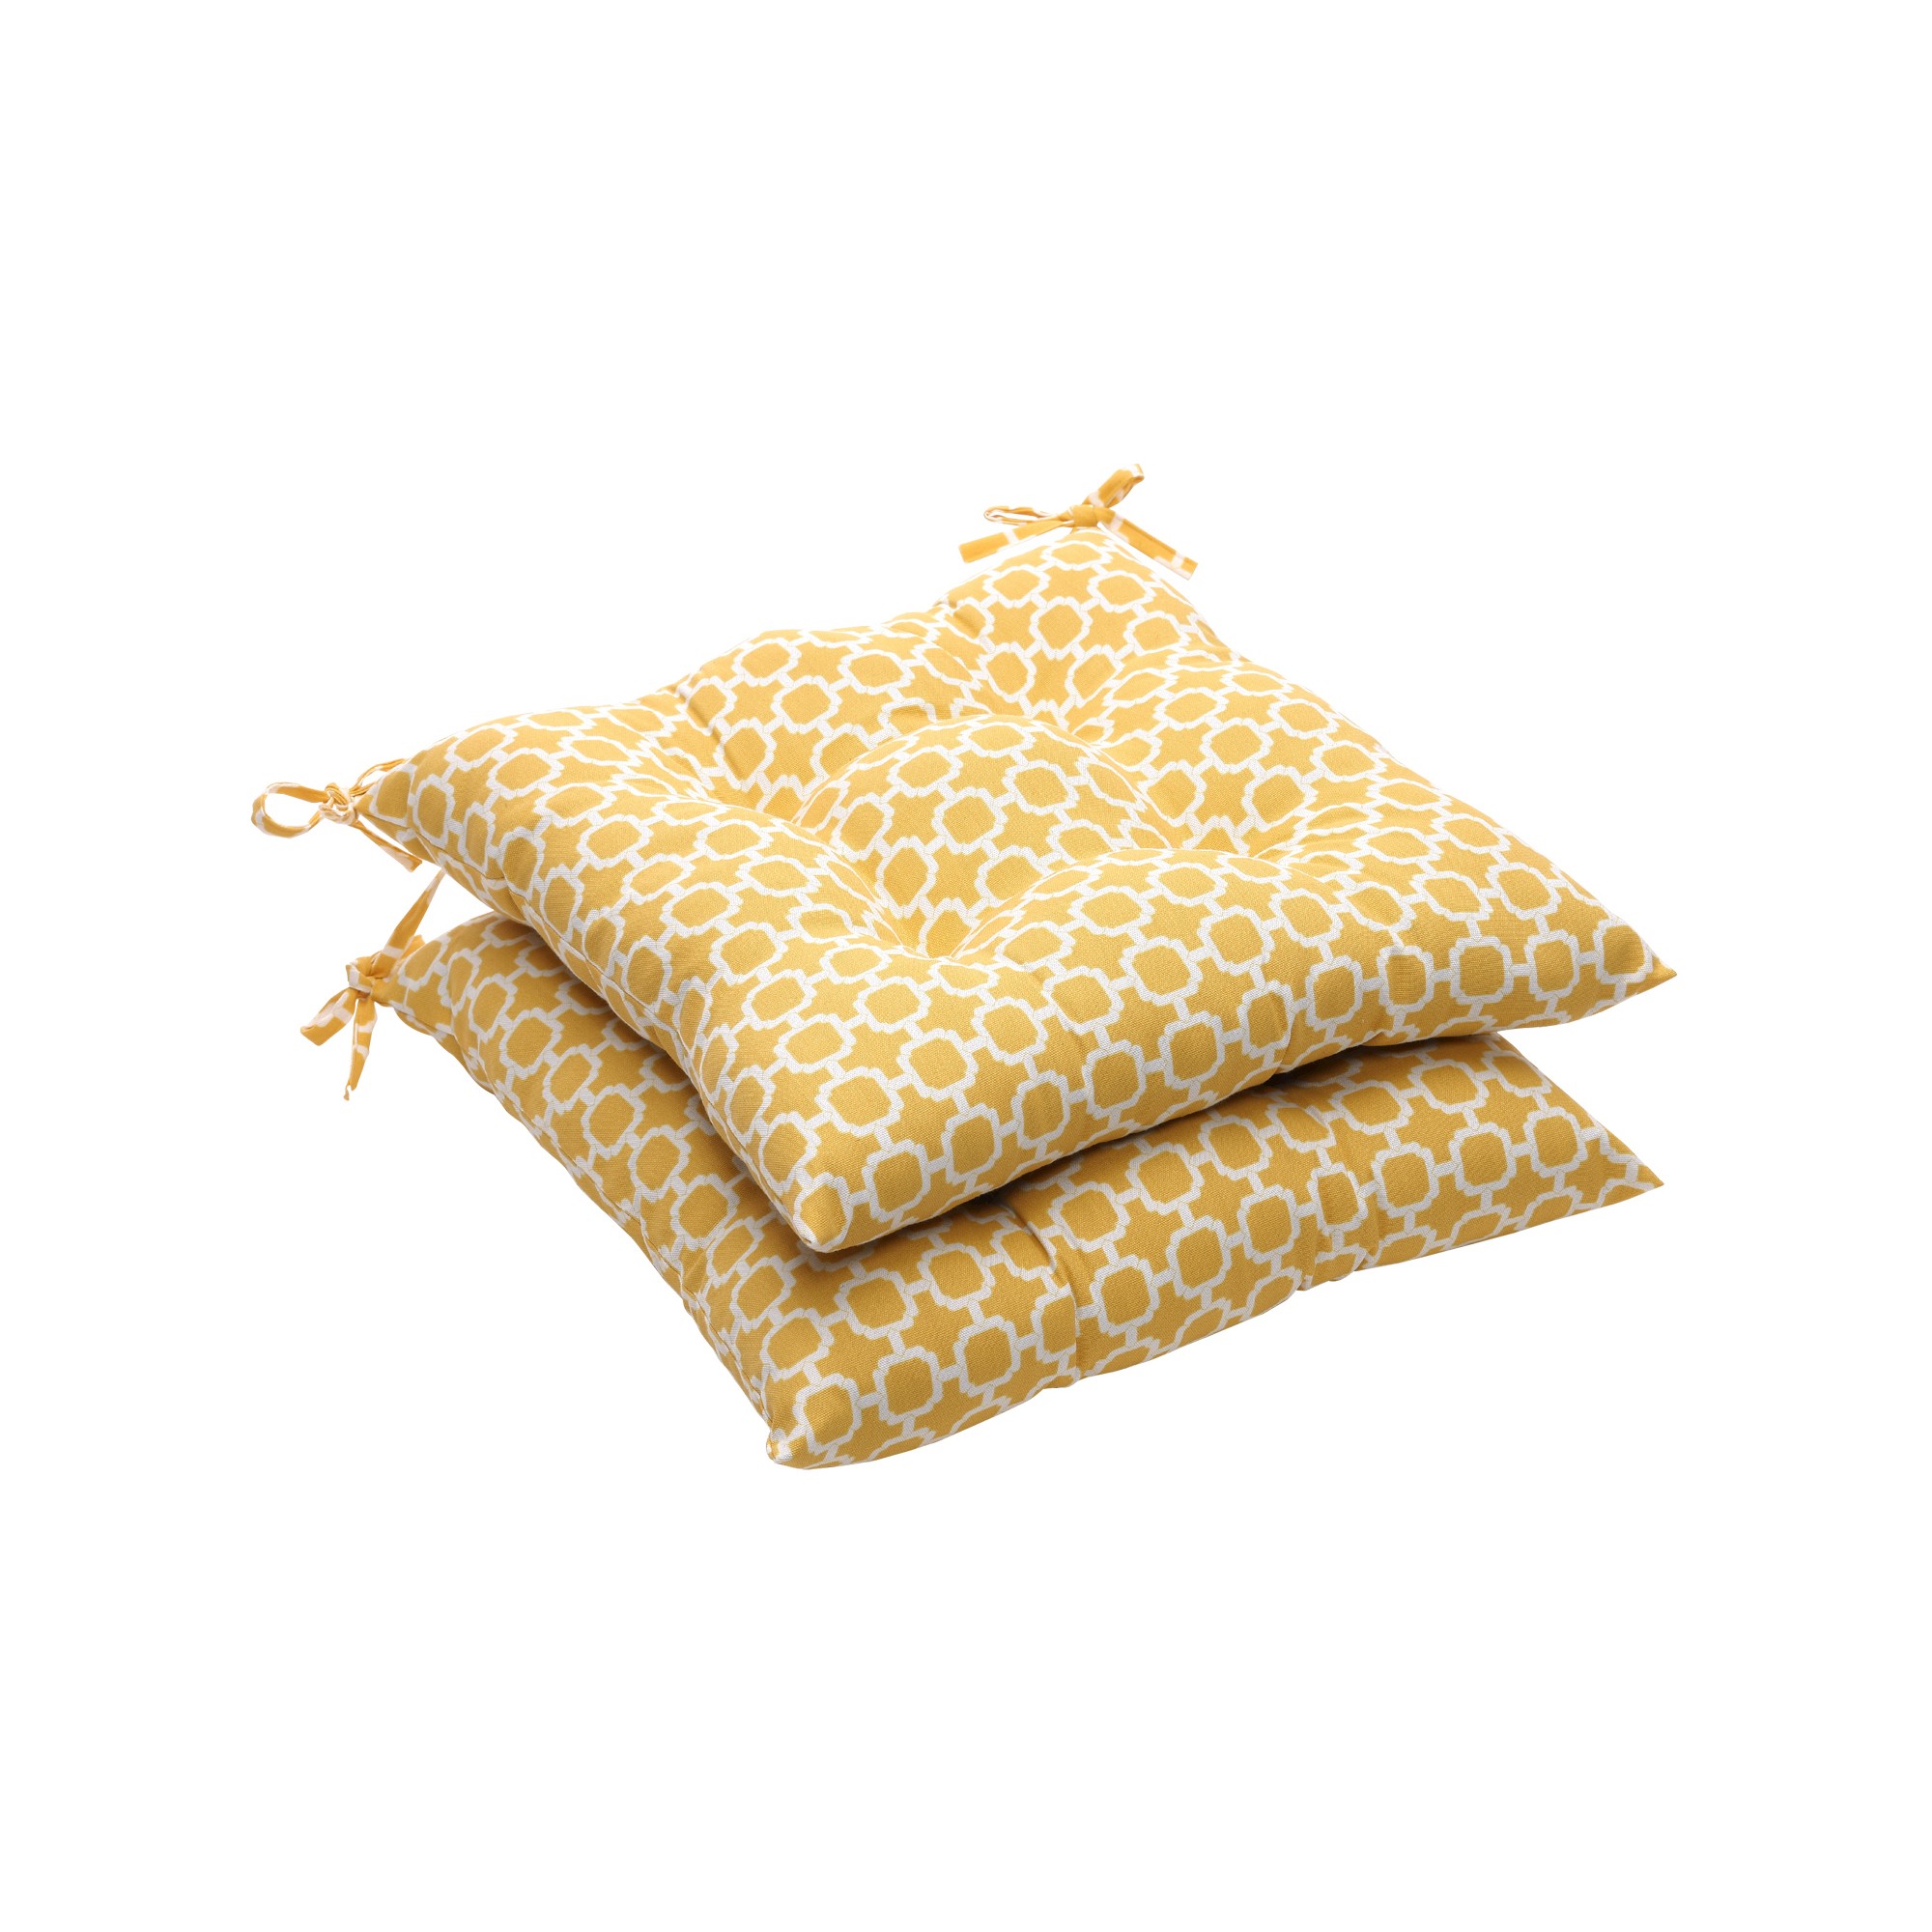 Outdoor 2 Pc Tufted Chair Cushion Set - Yellow/White Geometric - Pillow Perfect